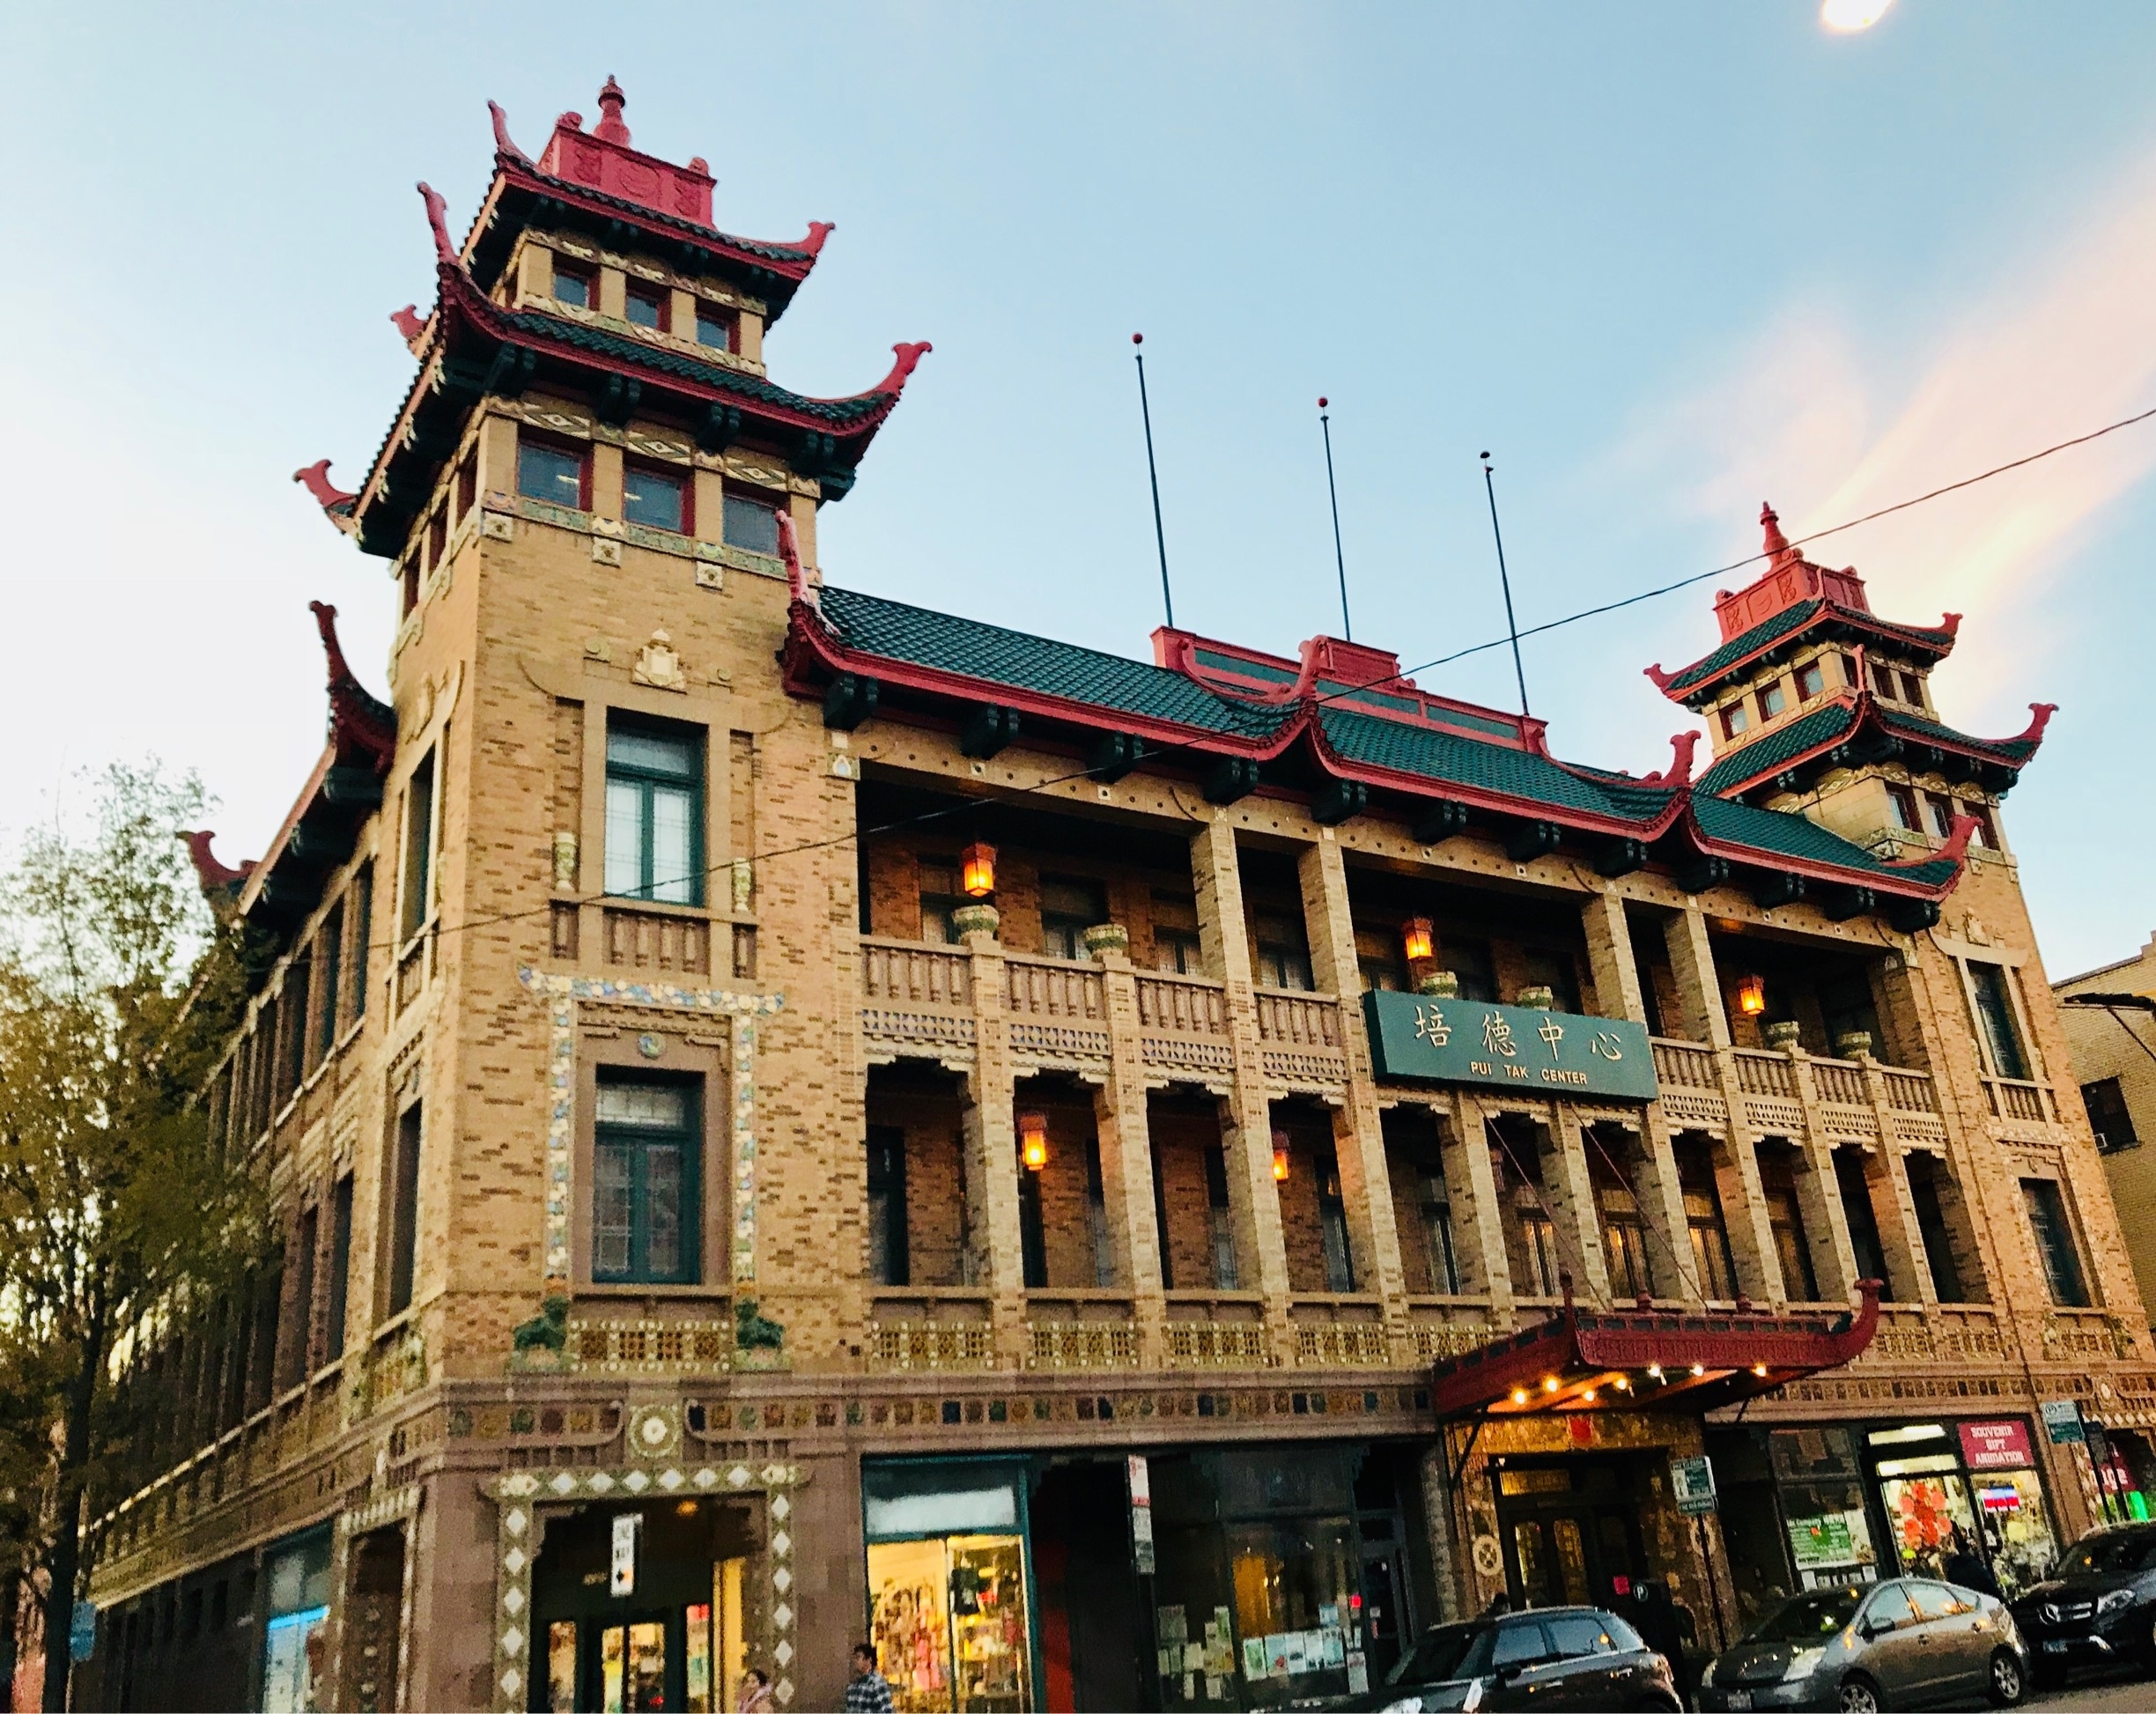 places to visit in chinatown chicago